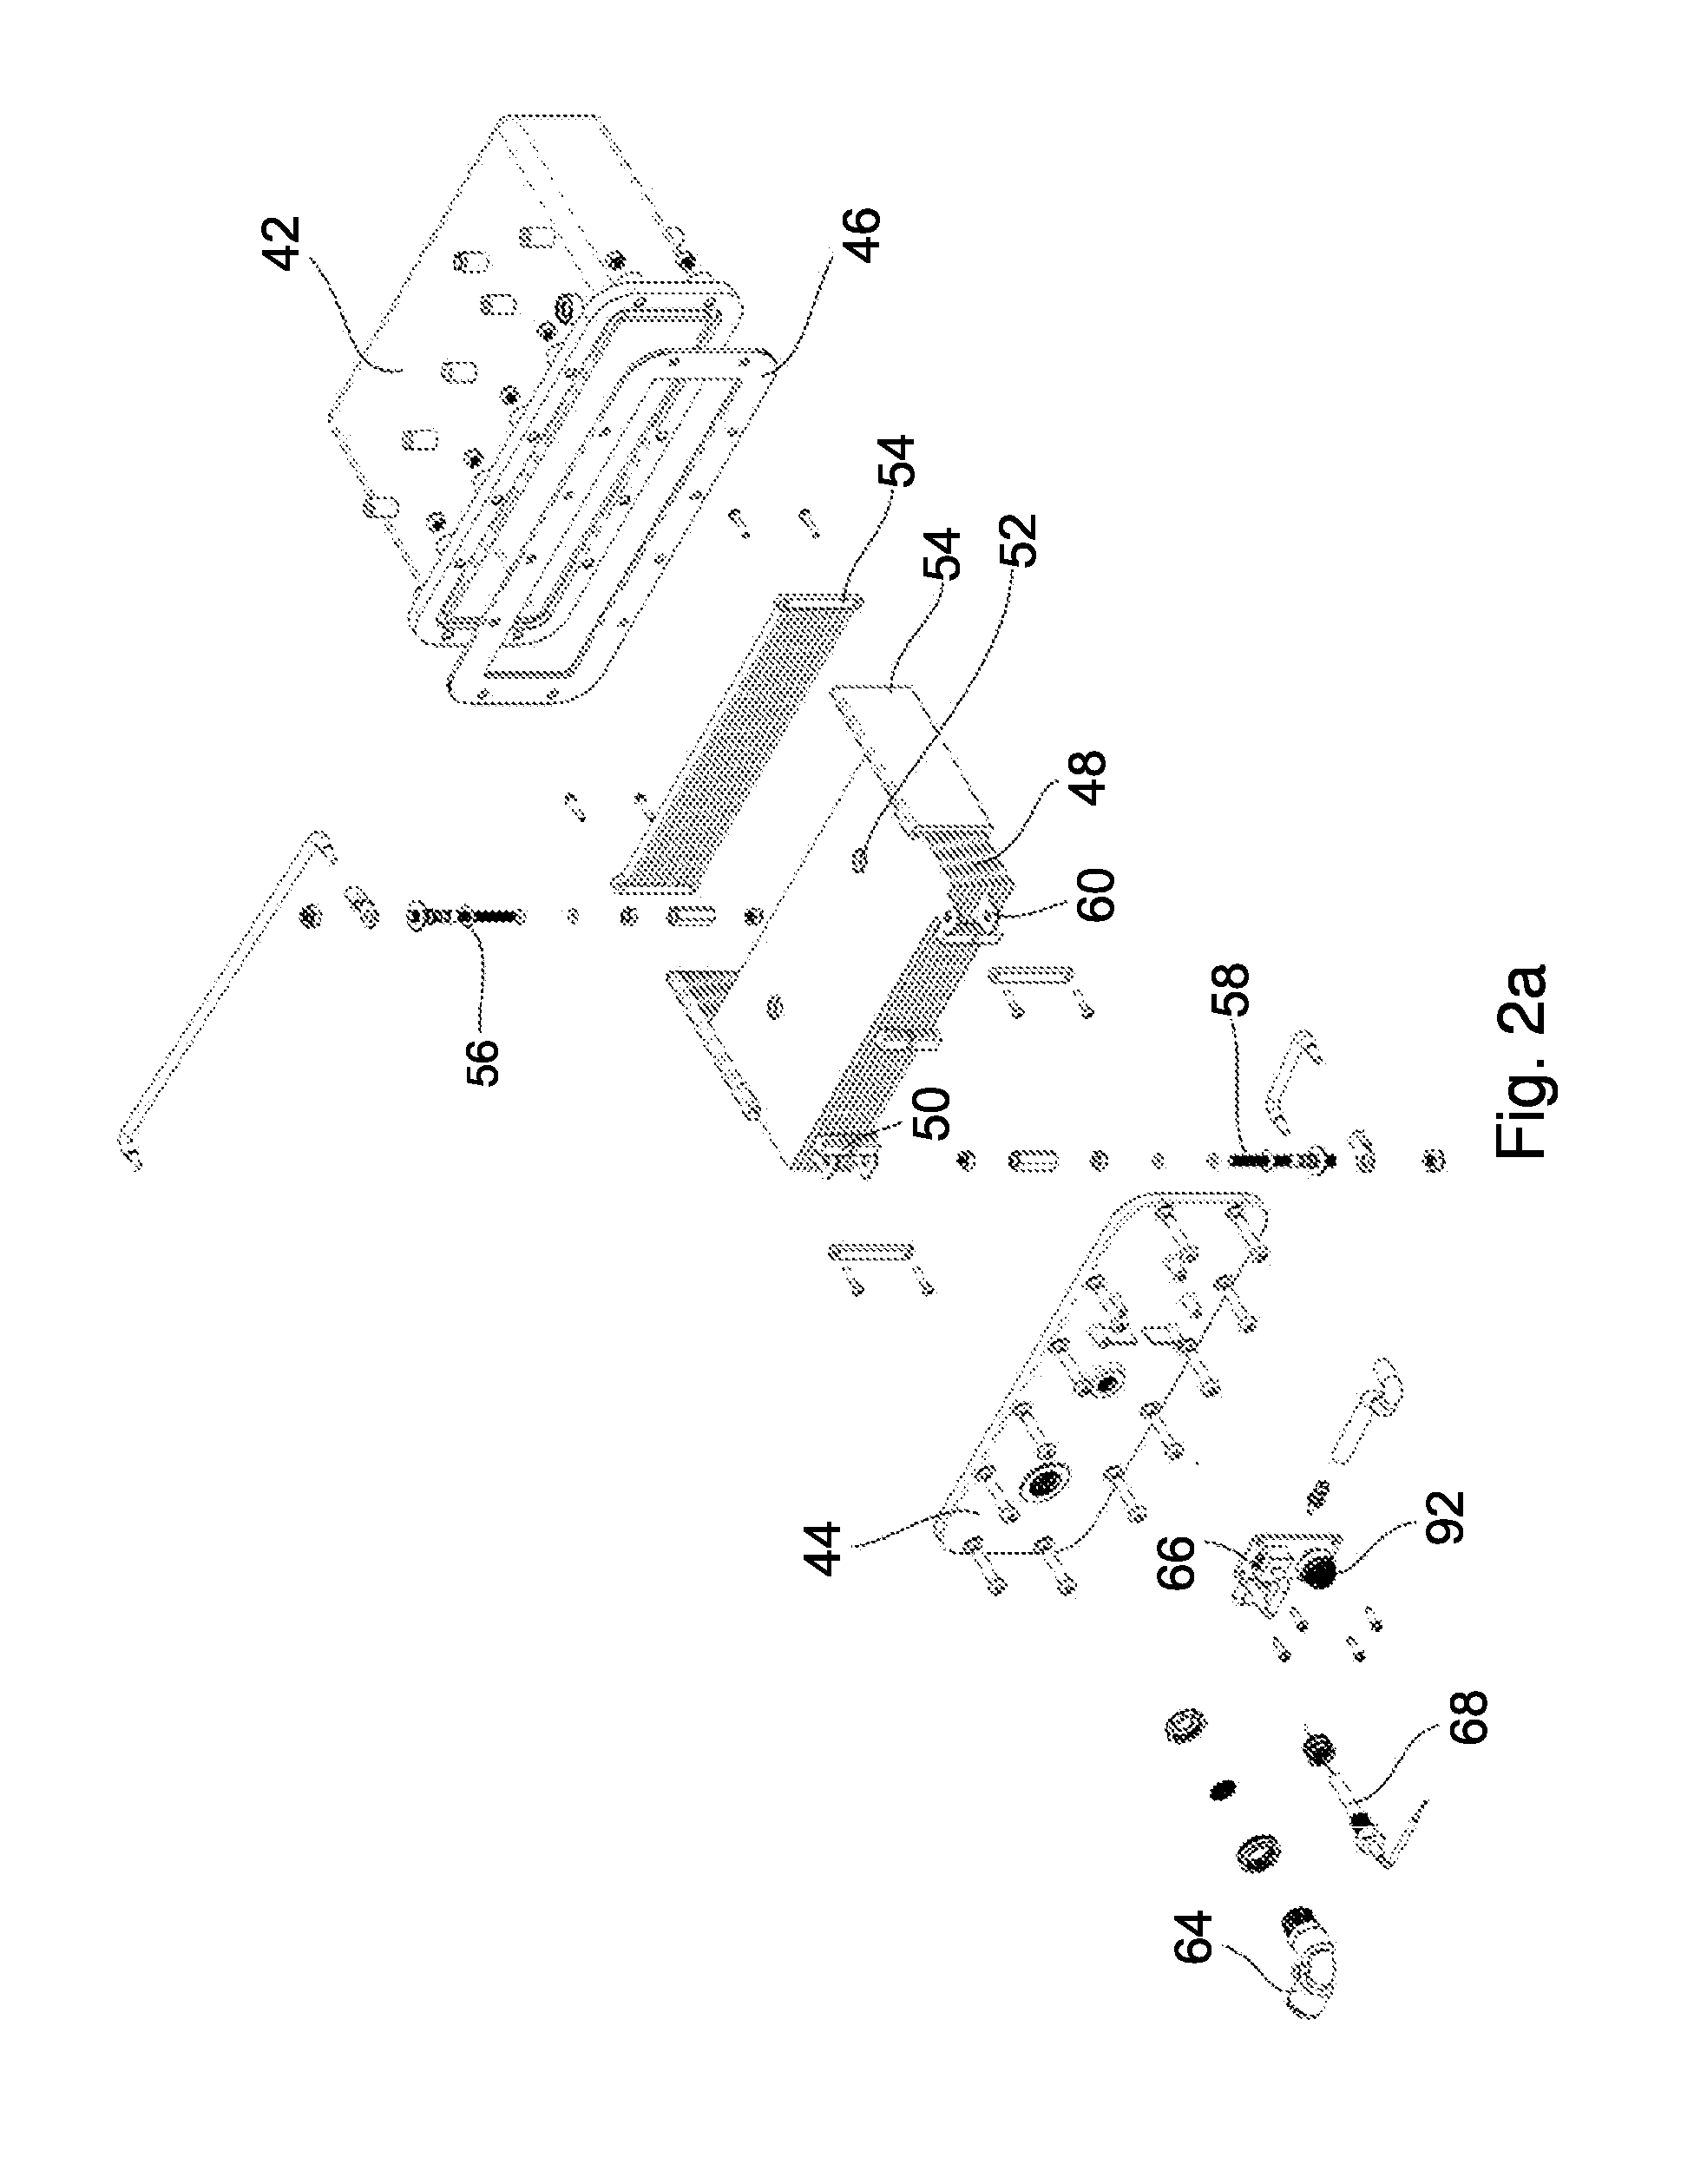 System and method of improving efficiency of combustion engines